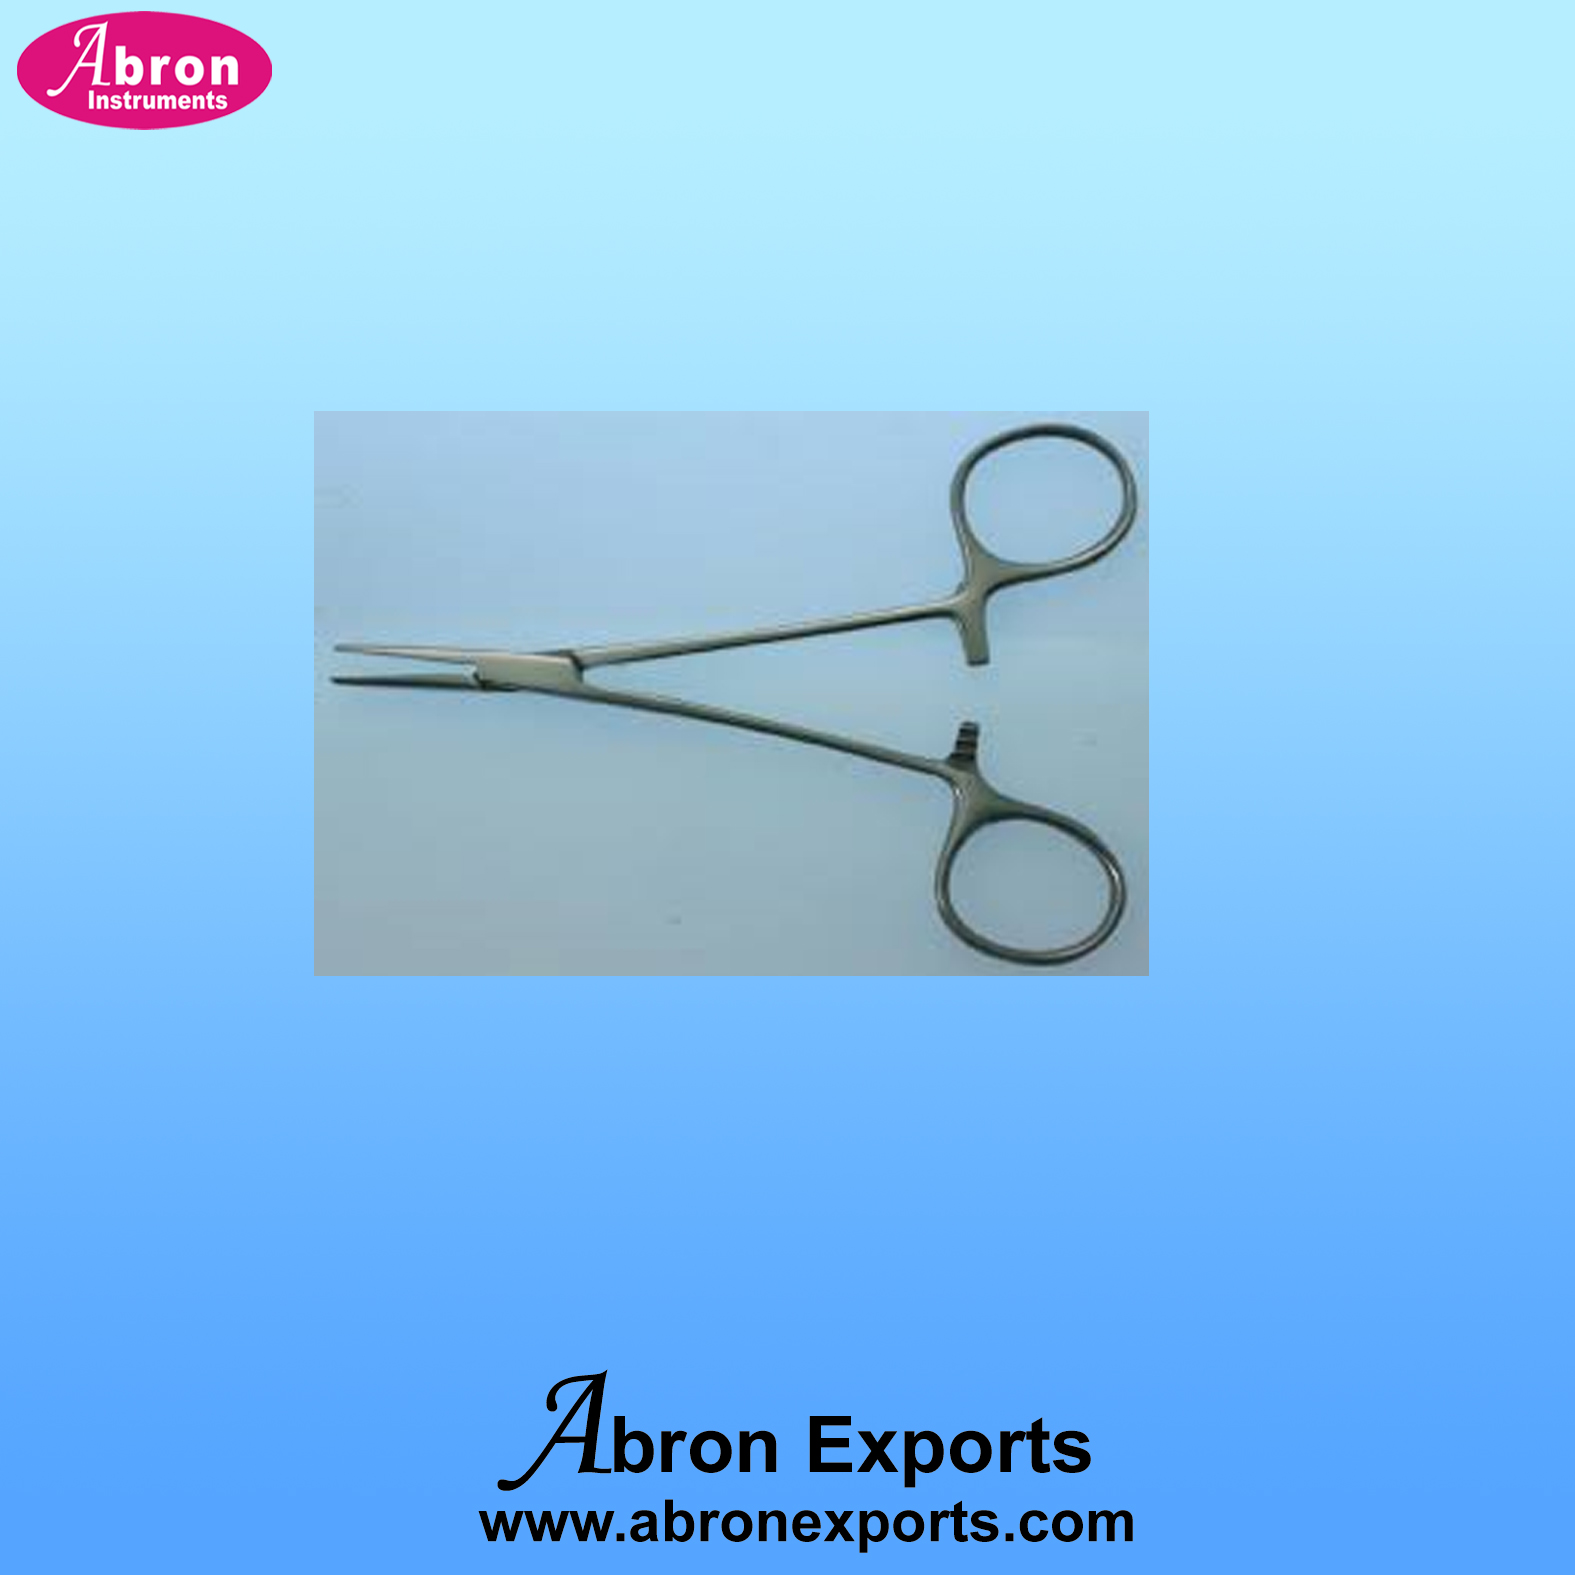 Surgical abron forceps heamostetical canemco ABM-2620-27 